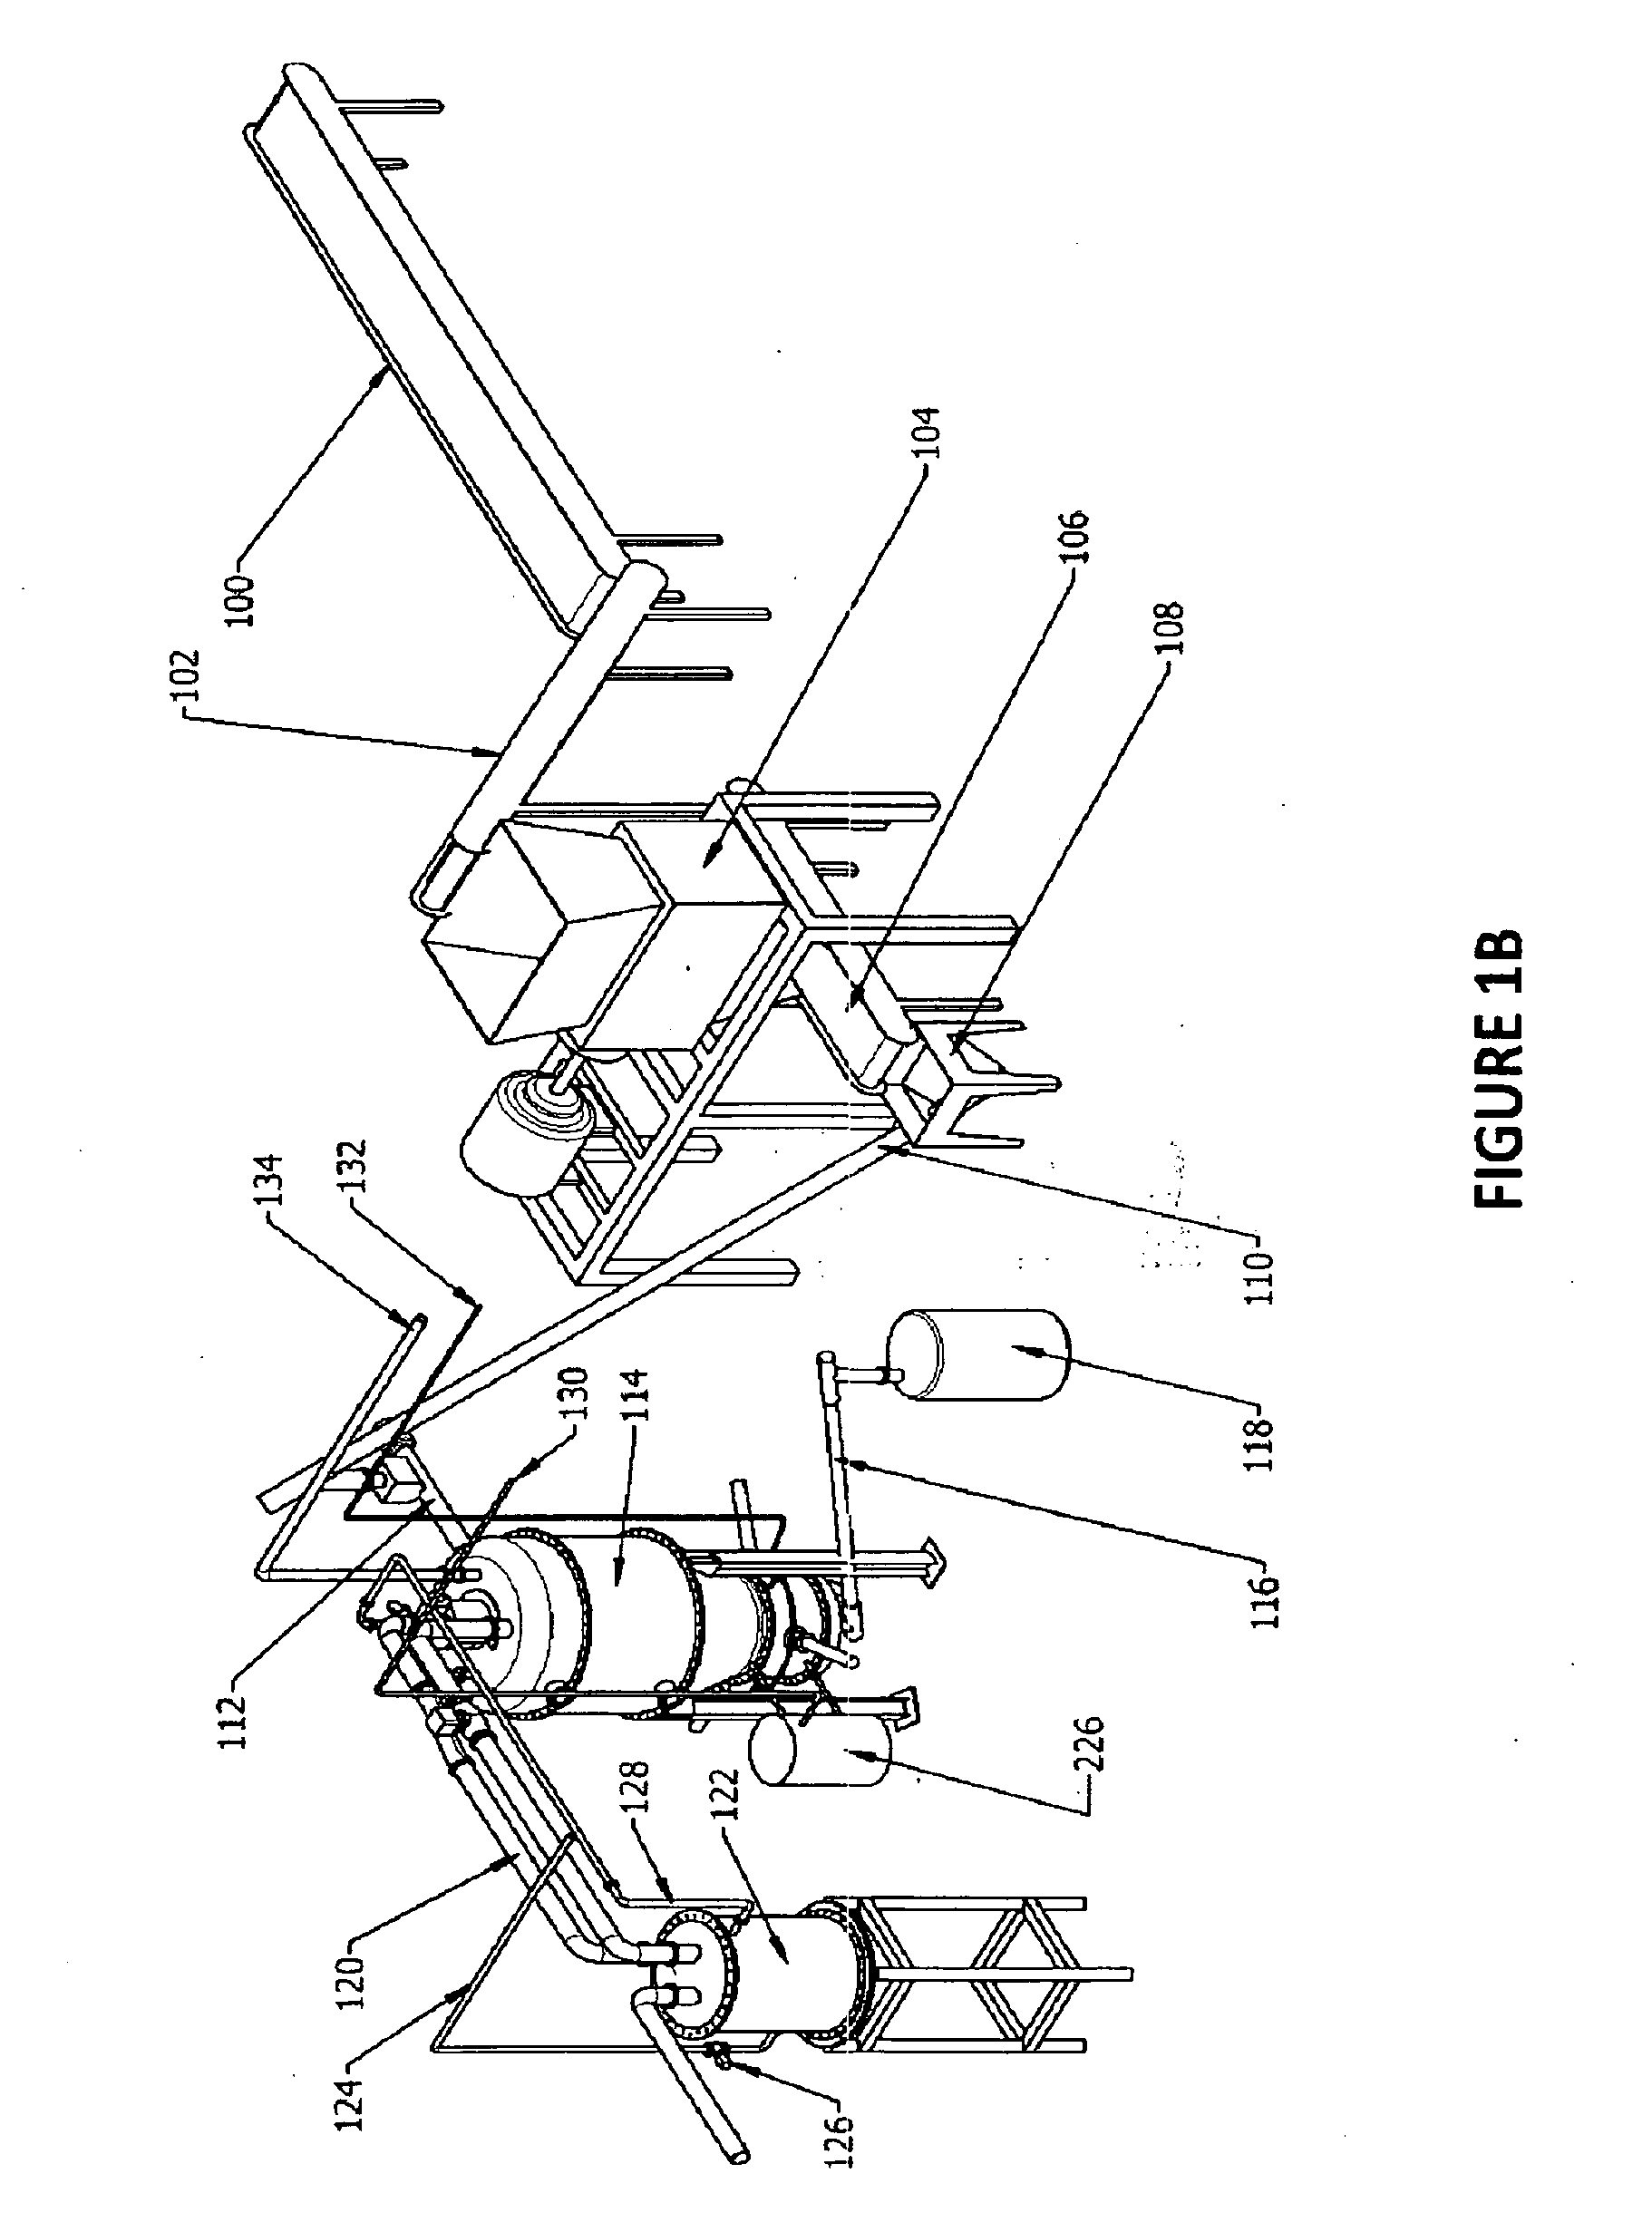 System and method for processing material to generate syngas using water injection